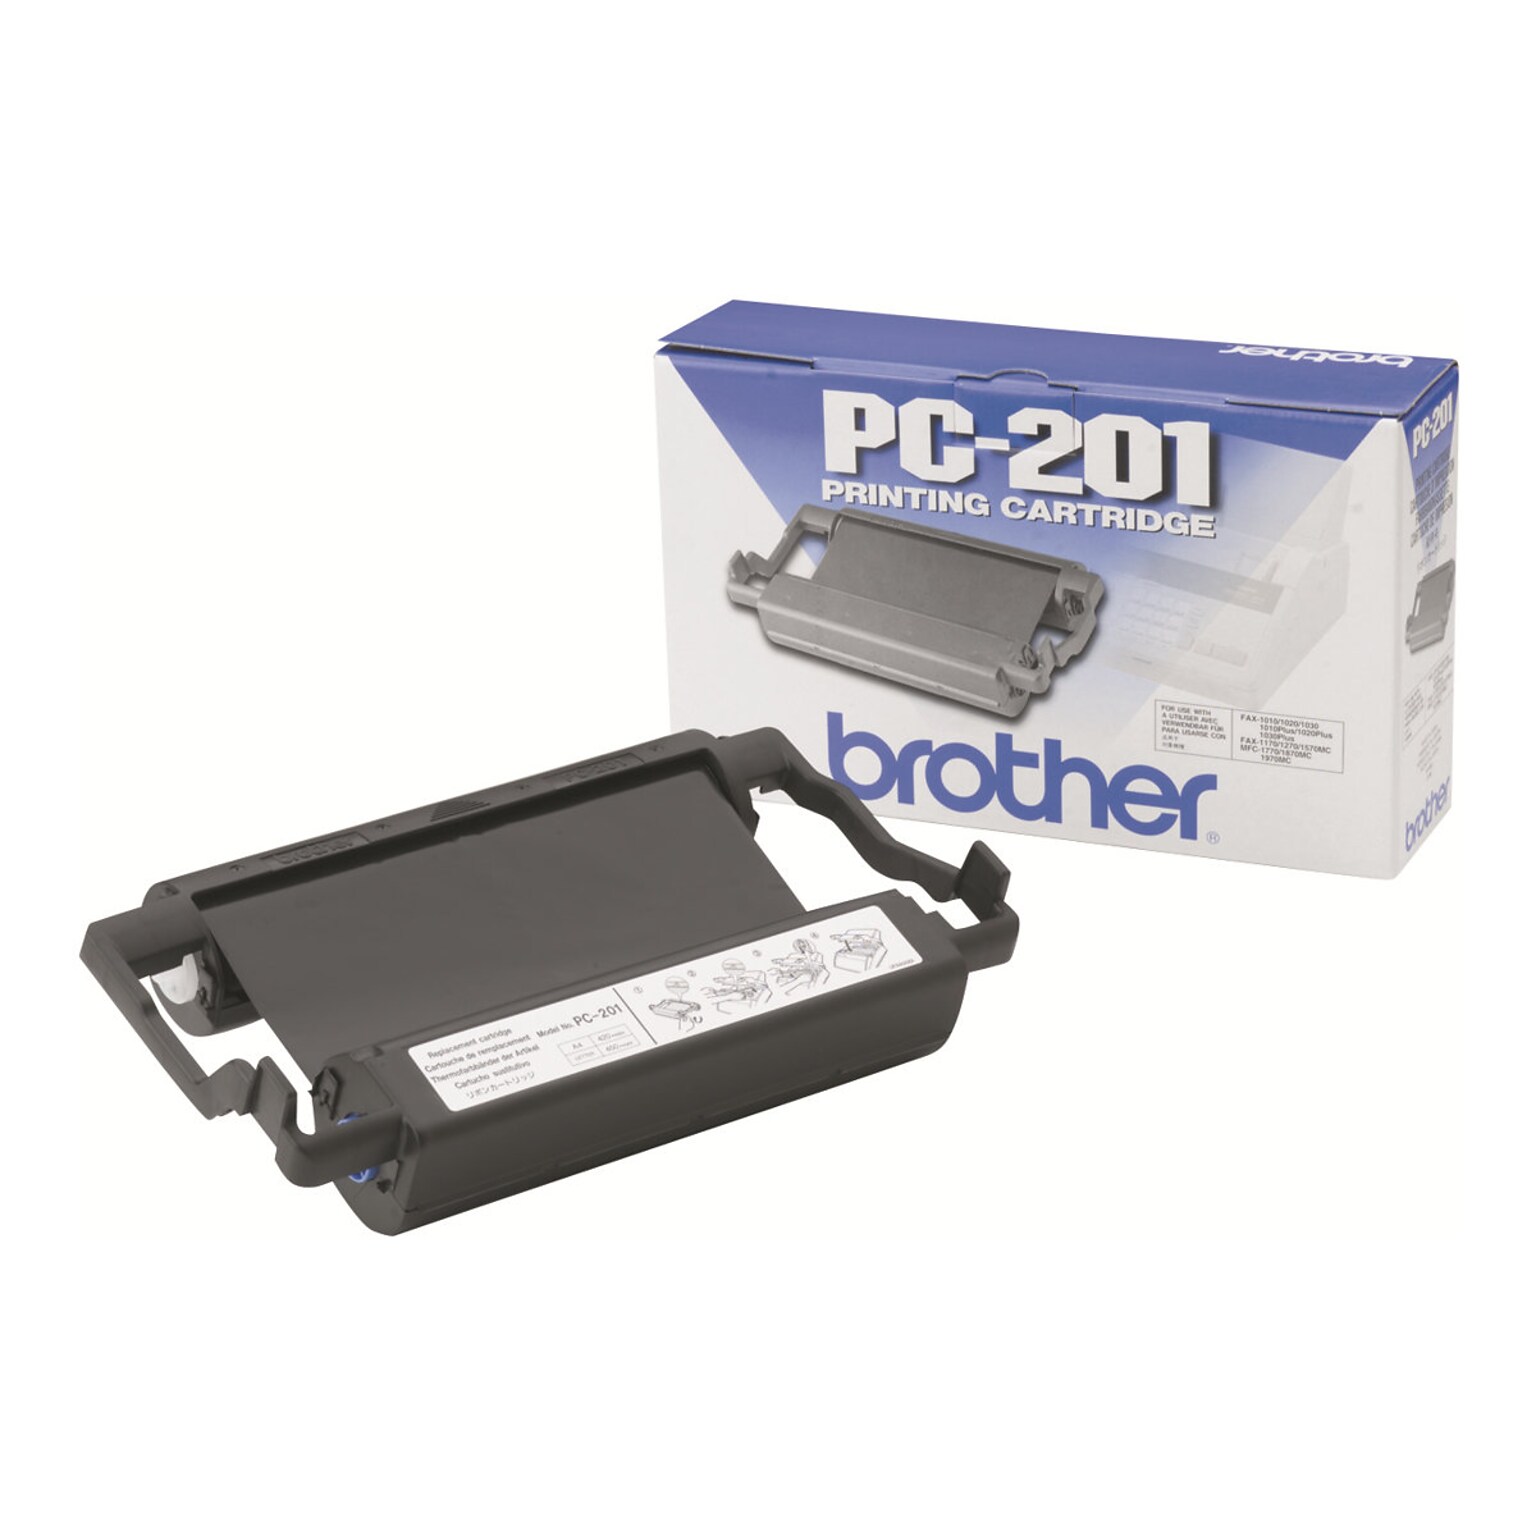 Brother PC-201 Black Standard Yield Fax Cartridge, Prints Up to 450 Pages (BRTPC201)